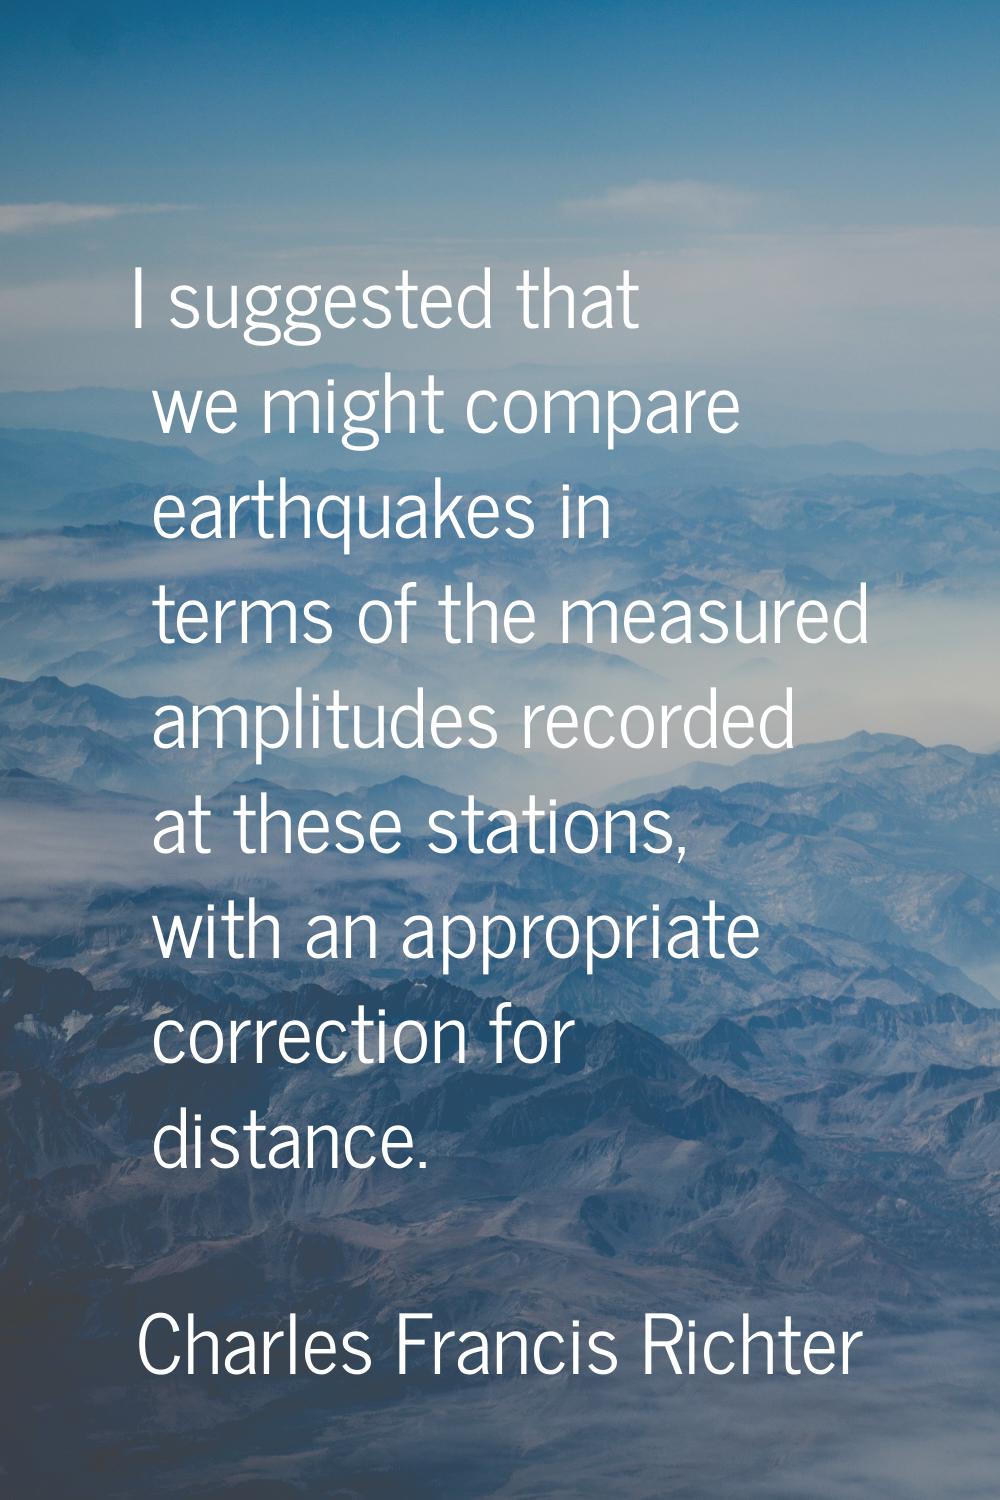 I suggested that we might compare earthquakes in terms of the measured amplitudes recorded at these